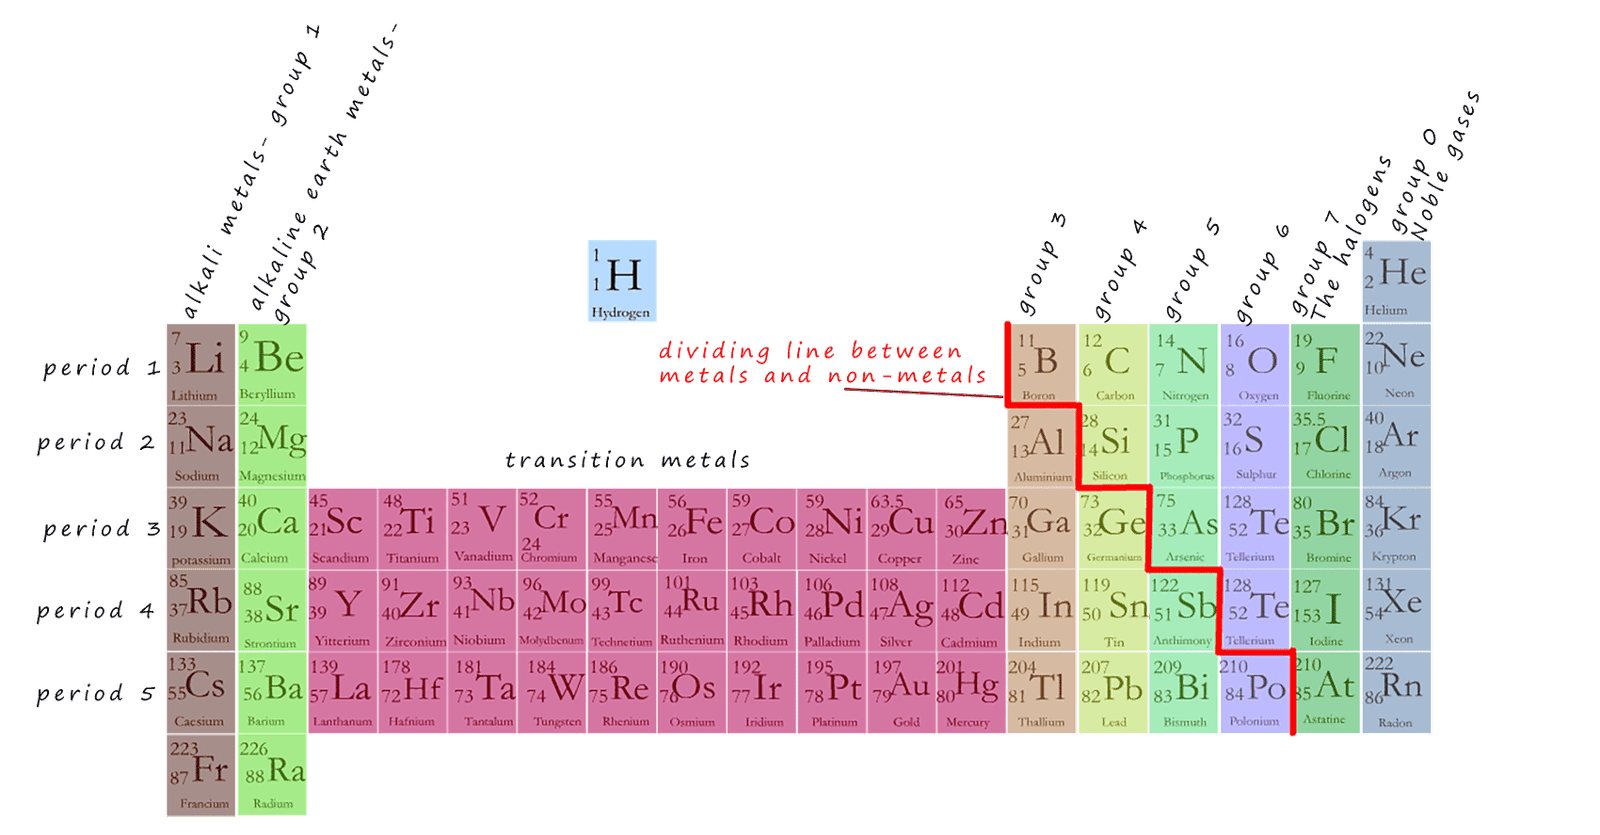 In the modern periodic table the elements are arranged according to their atomic number and not their atomic masses.  Outline of the modern periodic table showing all the periods and groups.